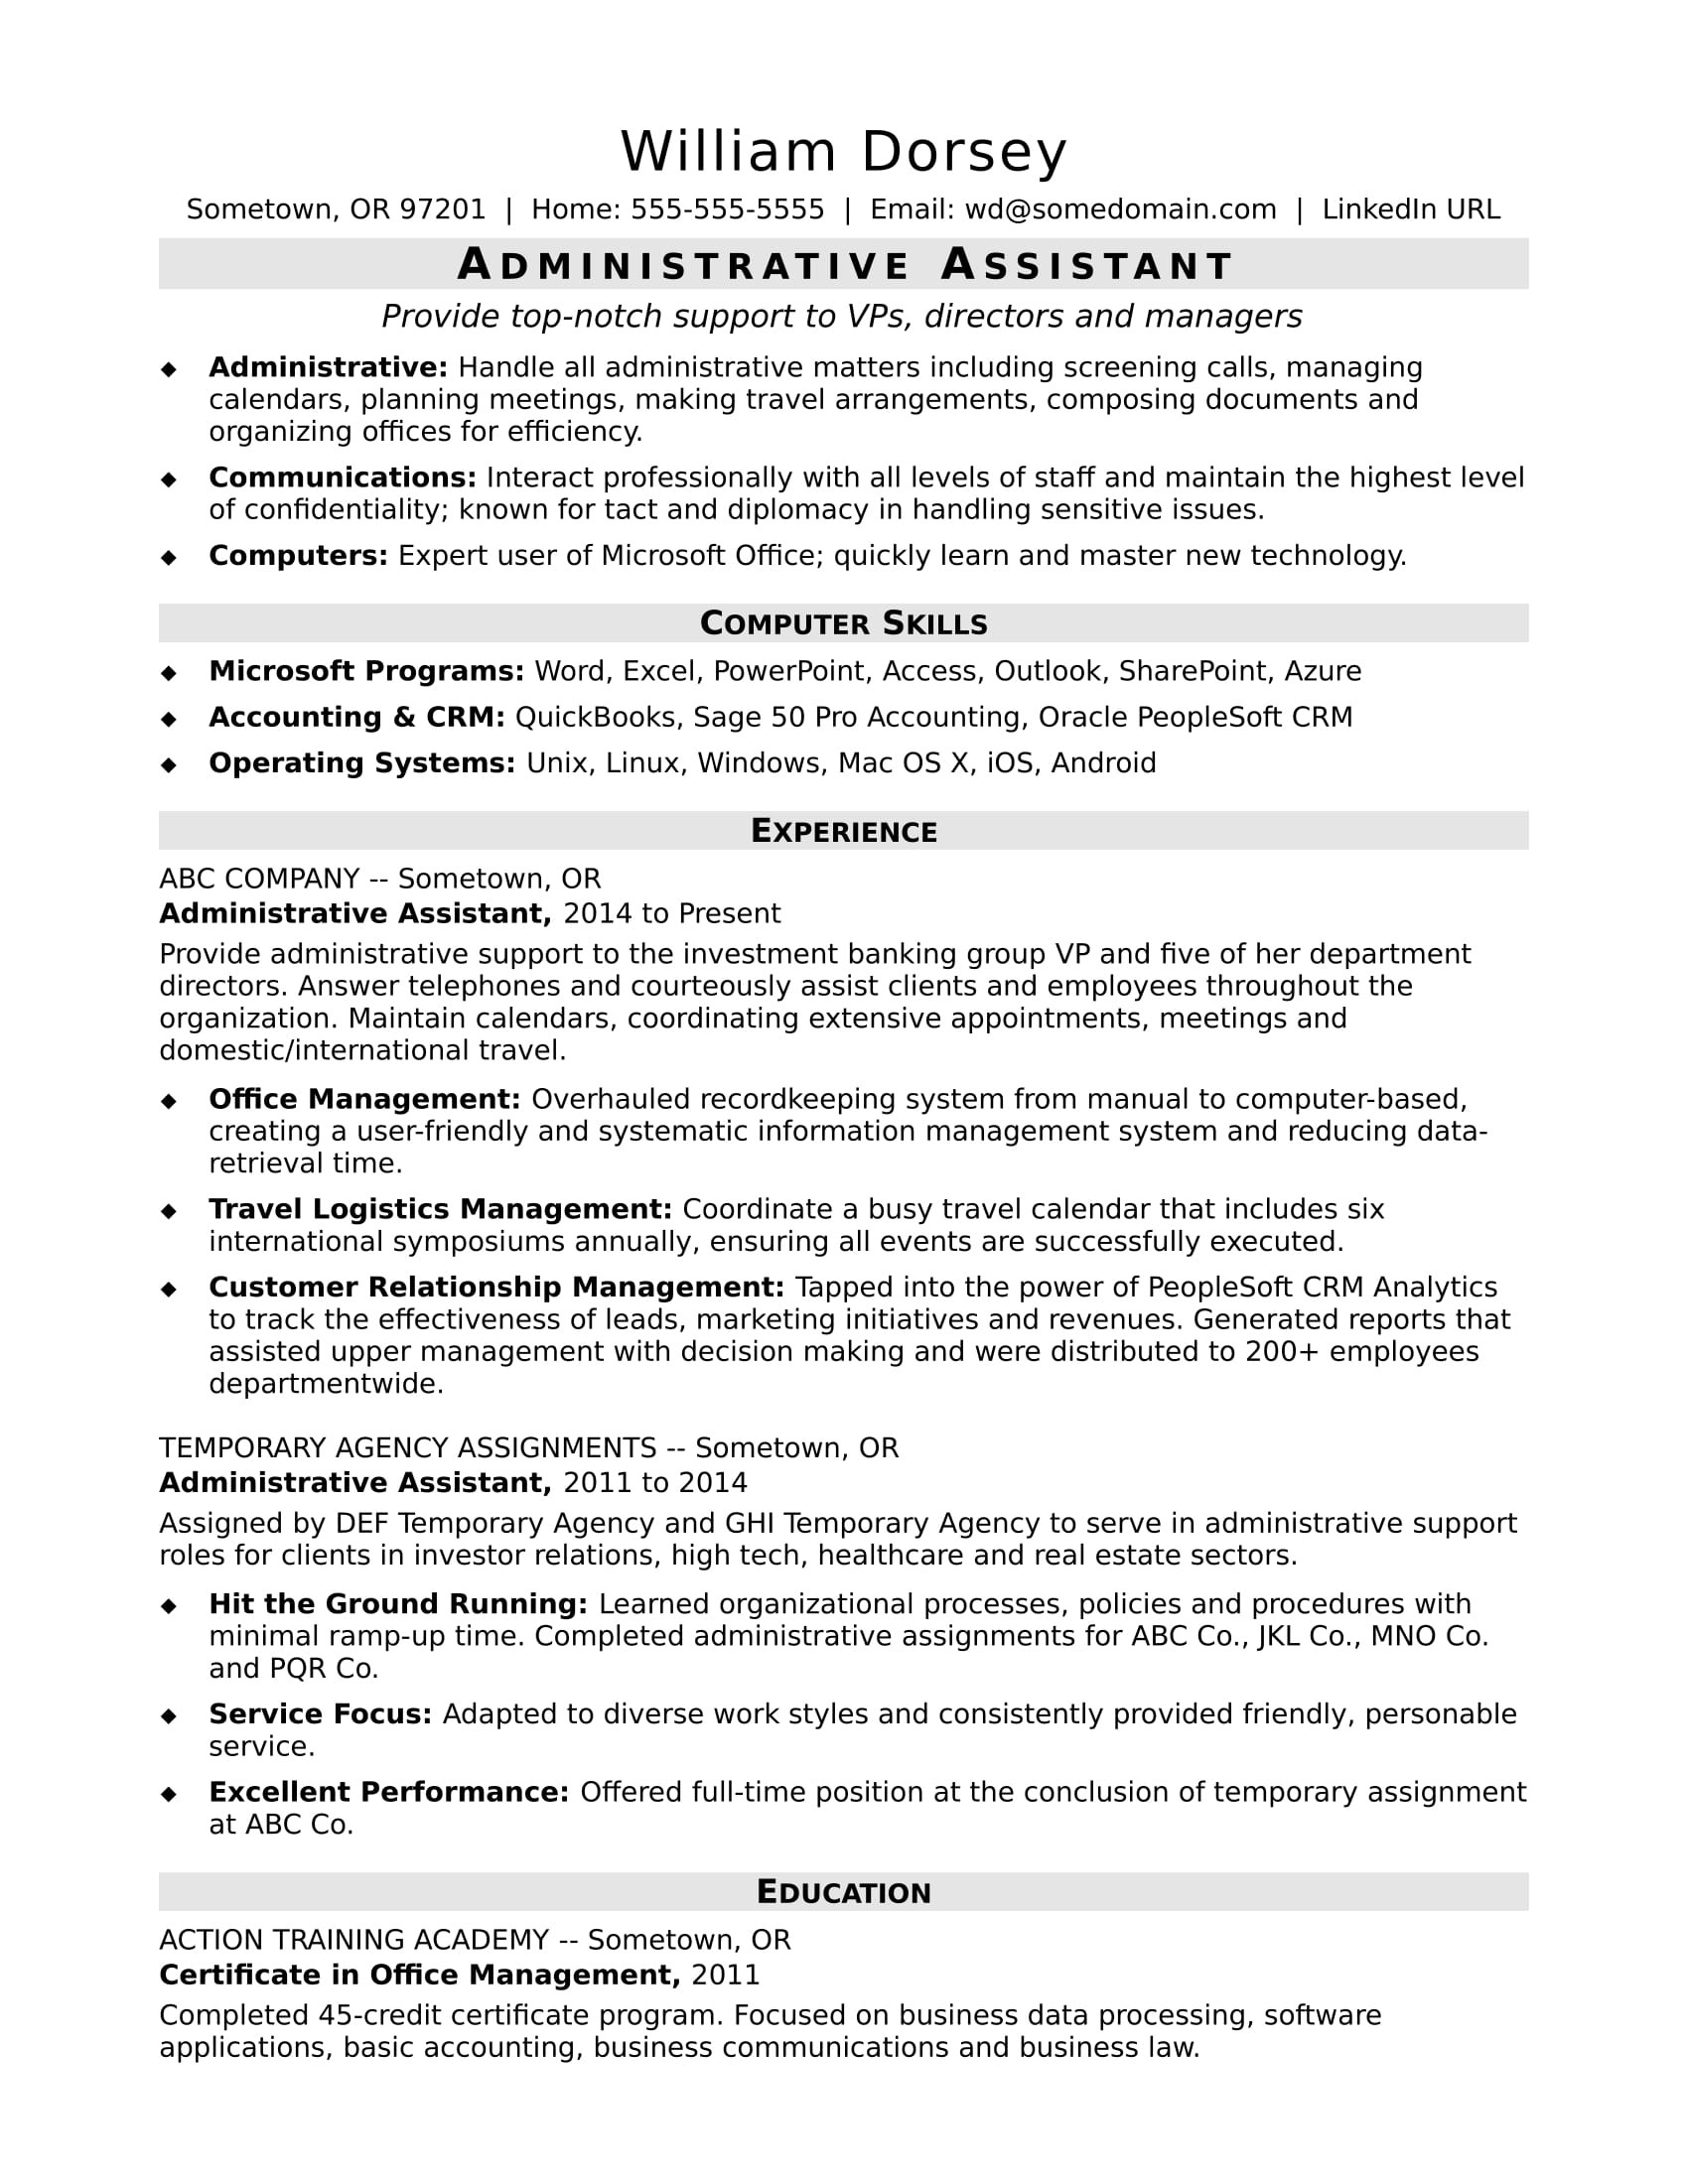 Samples Of Entry Level Resumes for Administrative Professionals Administrative assistant Resume Sample Monster.com